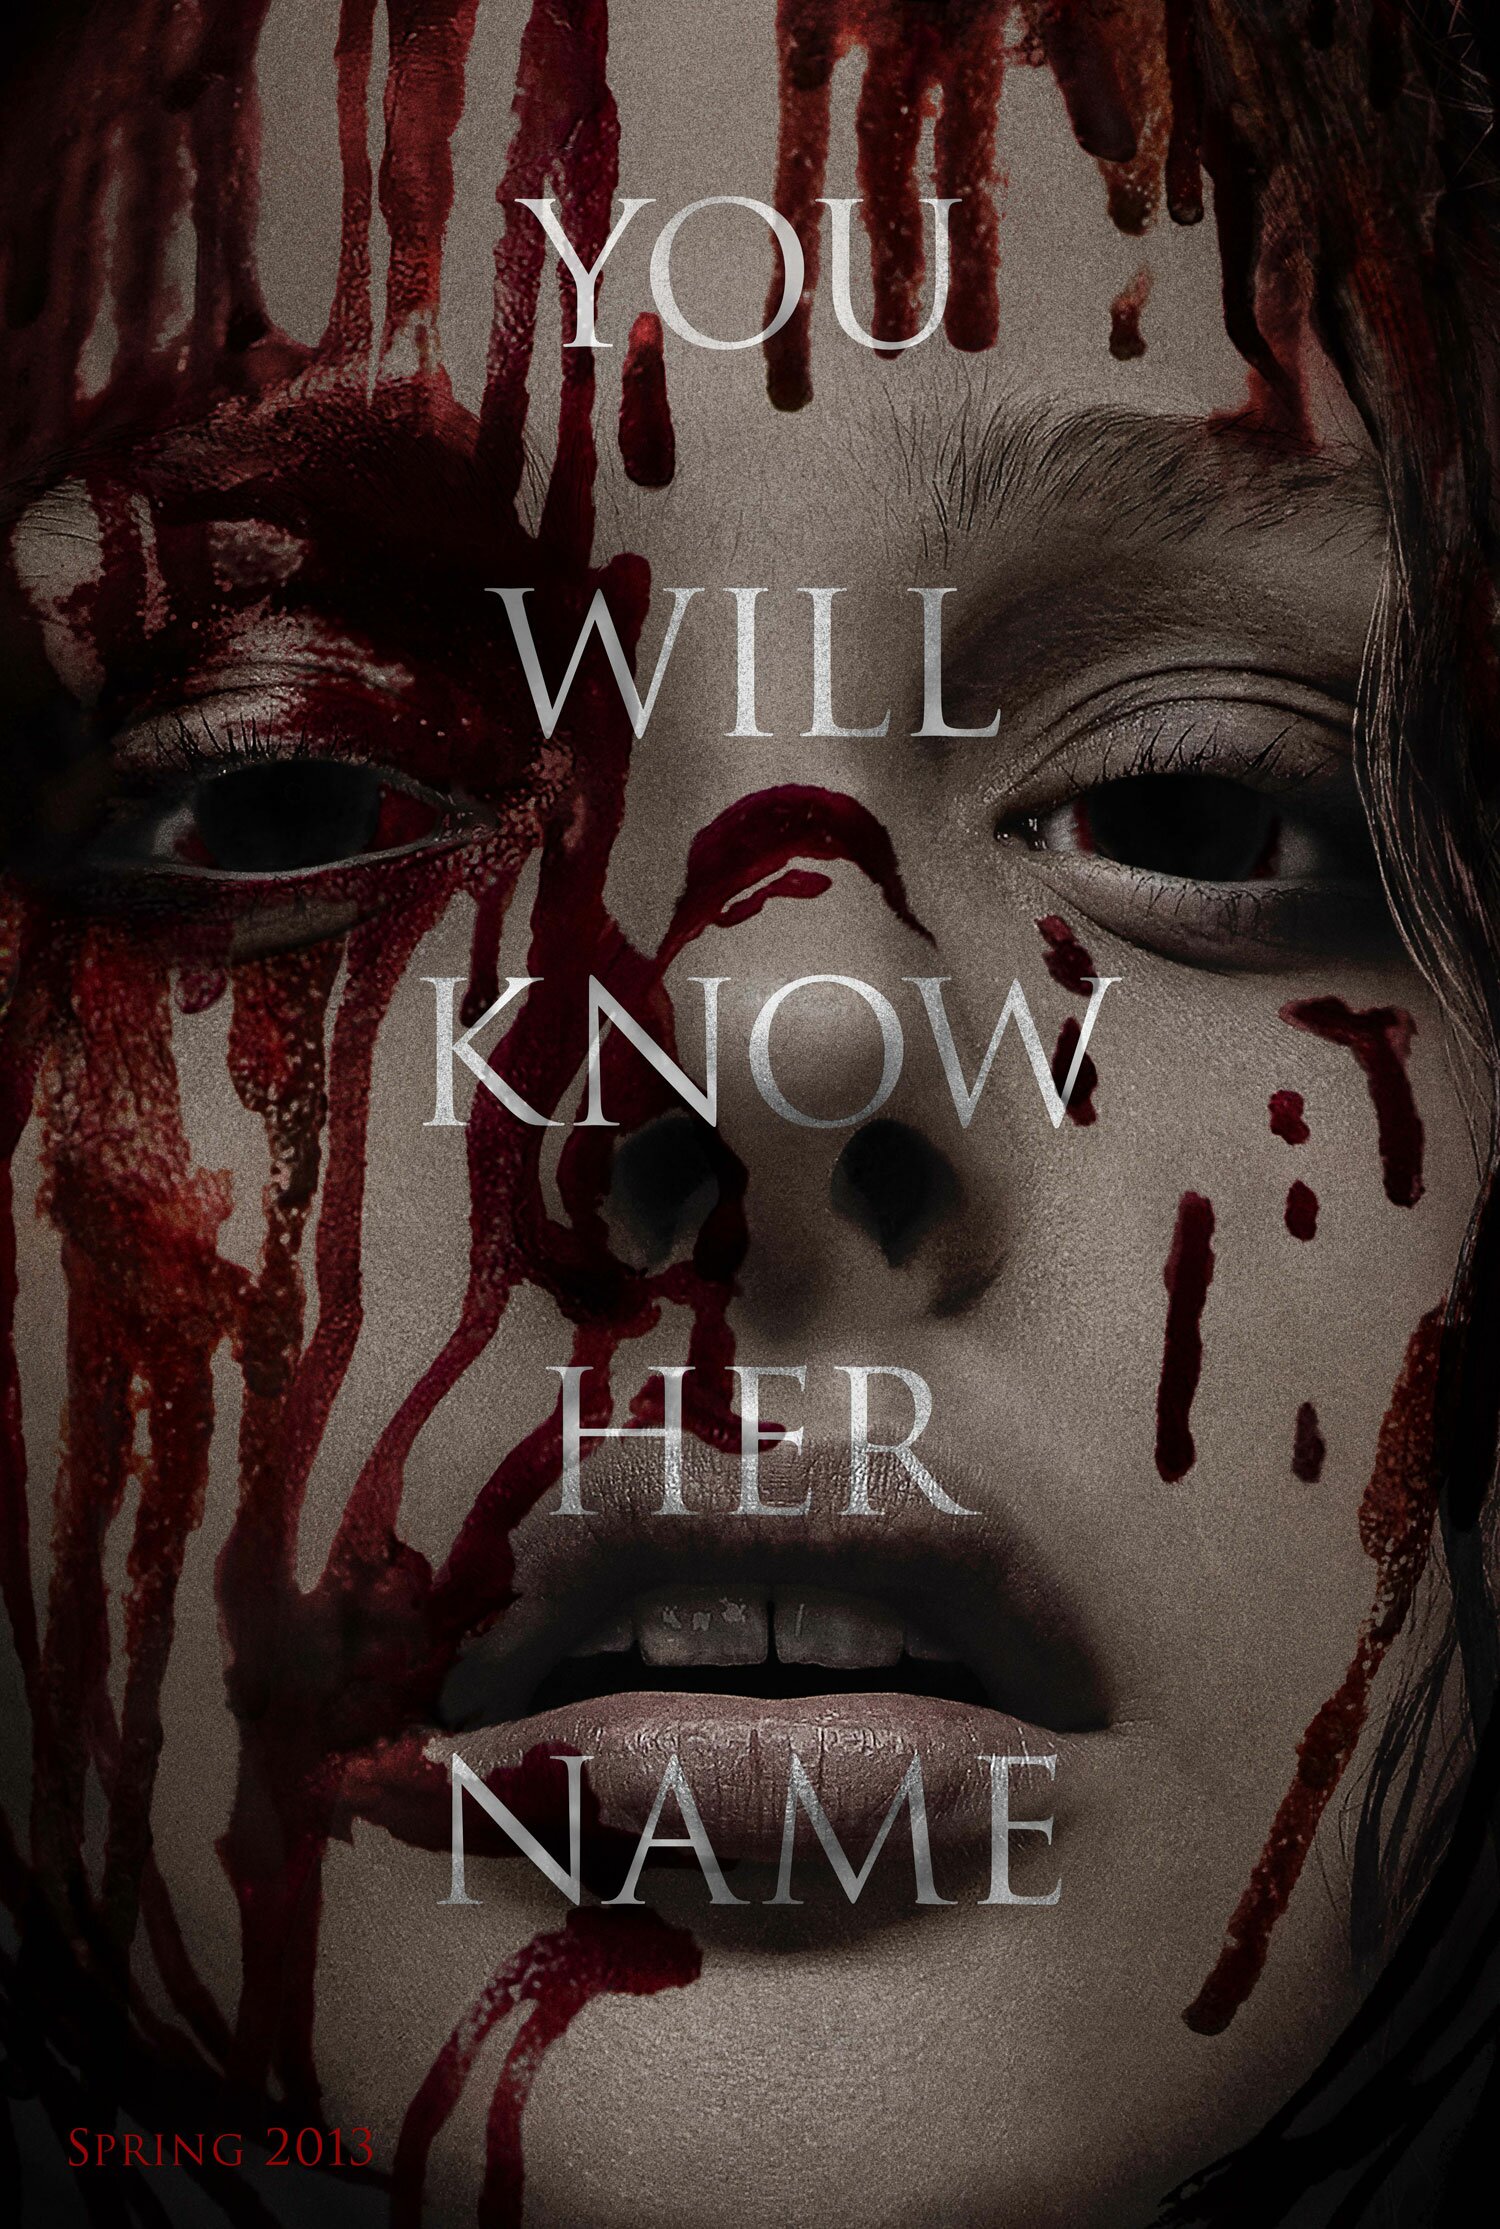 Carrie remake poster